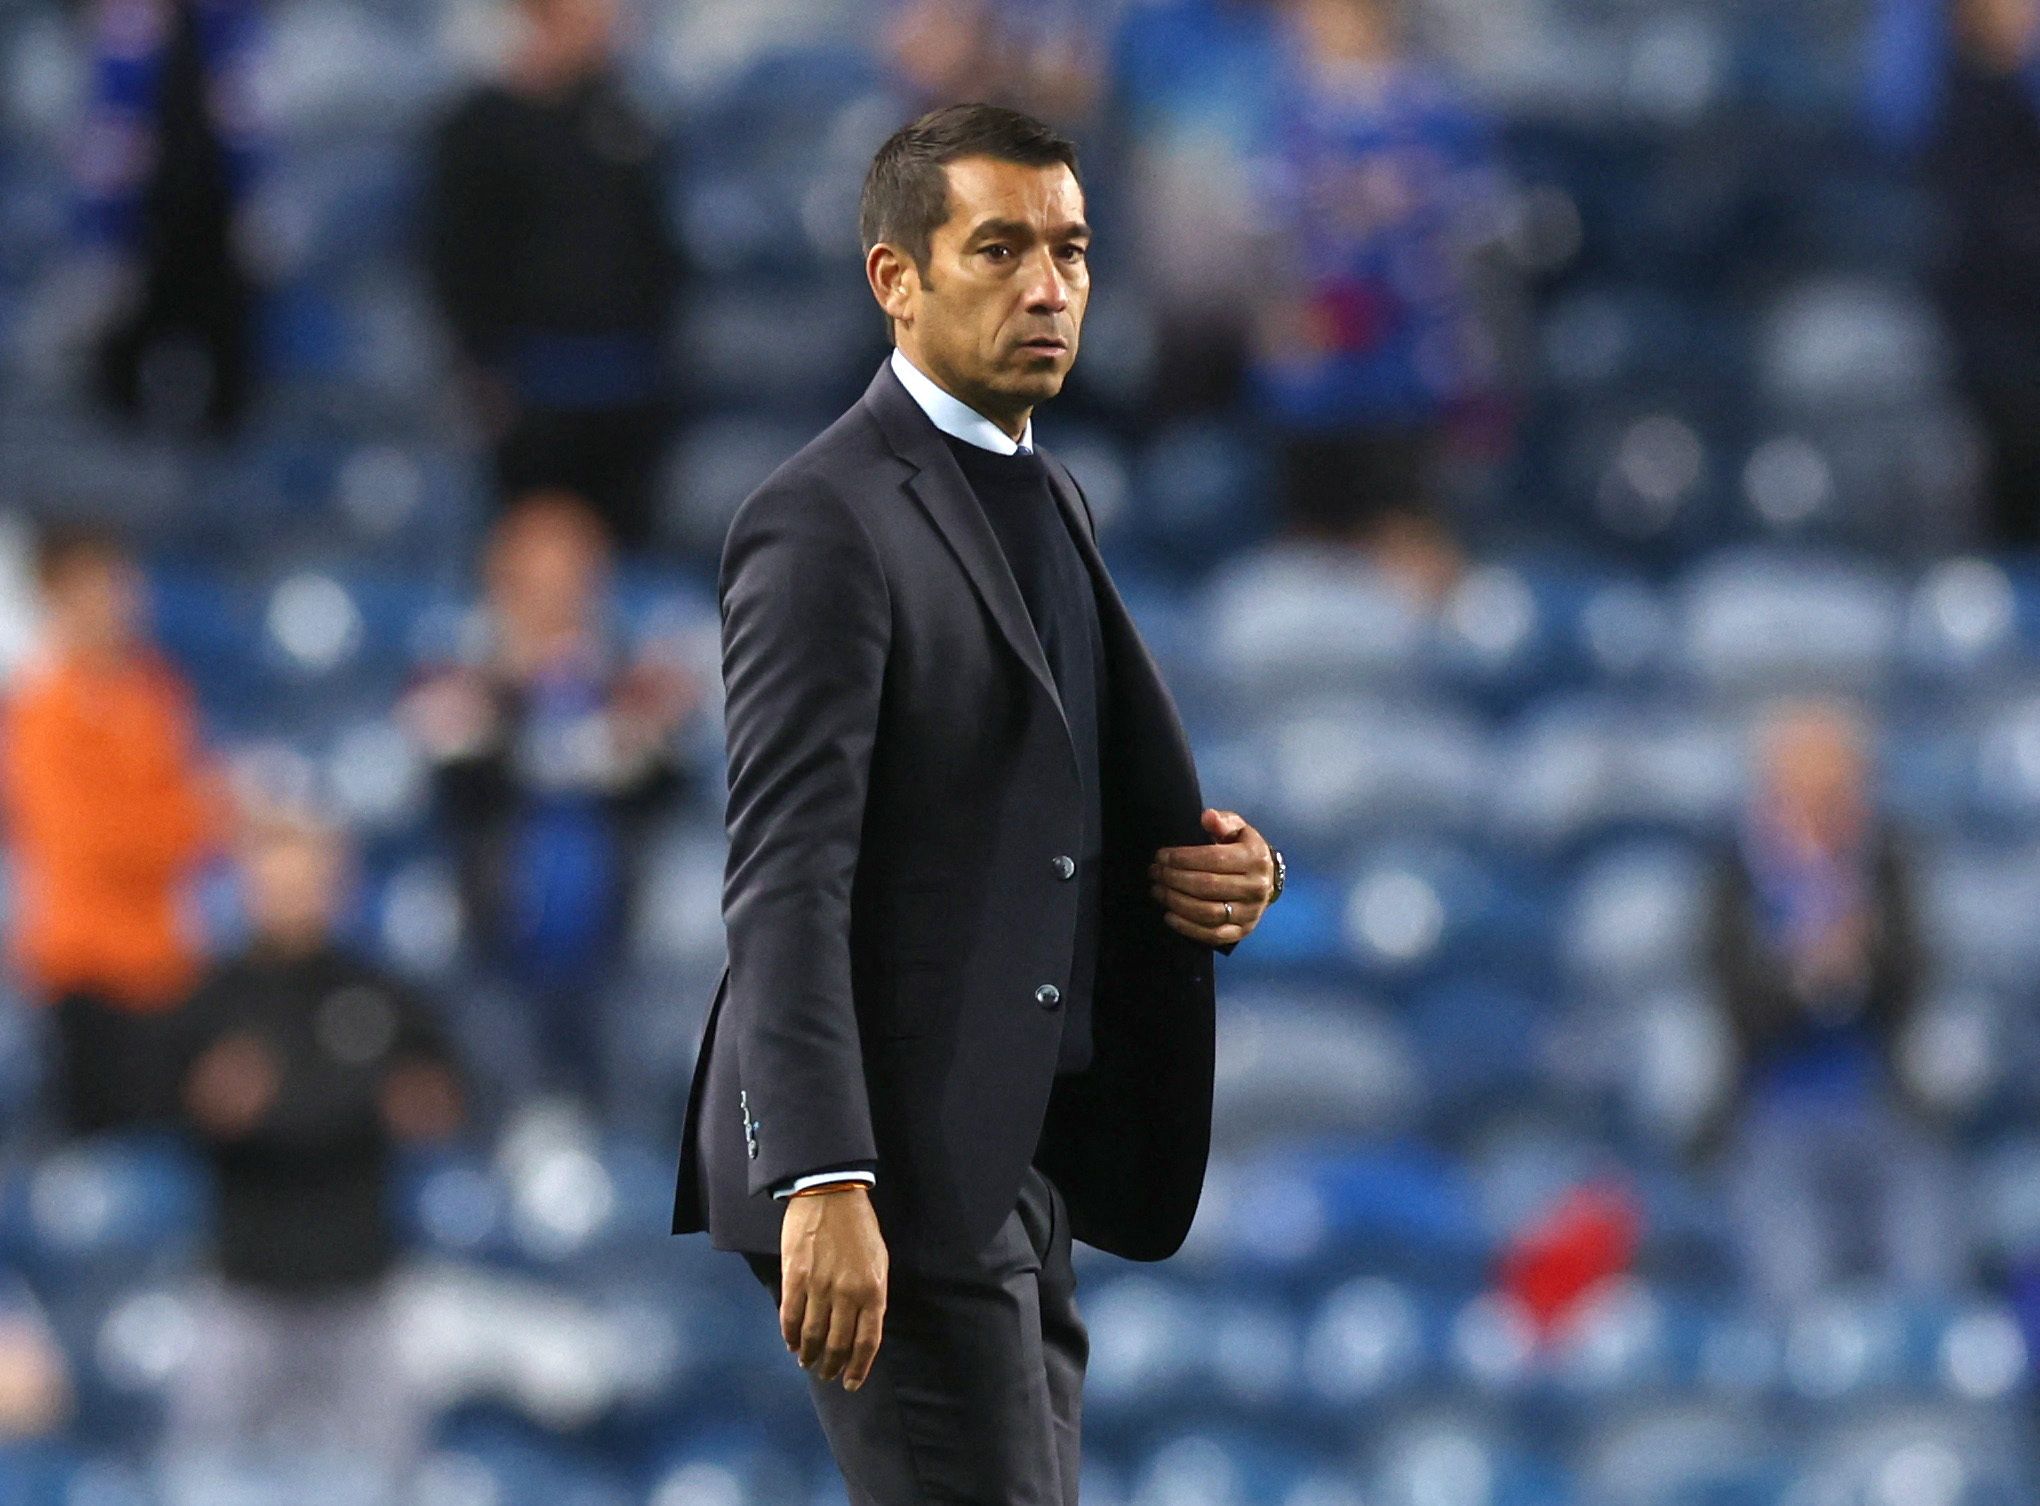 Soccer Football - Champions League - Group A - Rangers v Napoli - Ibrox, Glasgow, Scotland, Britain - September 14, 2022 Rangers manager Giovanni van Bronckhorst looks dejected after the match Action Images via Reuters/Lee Smith